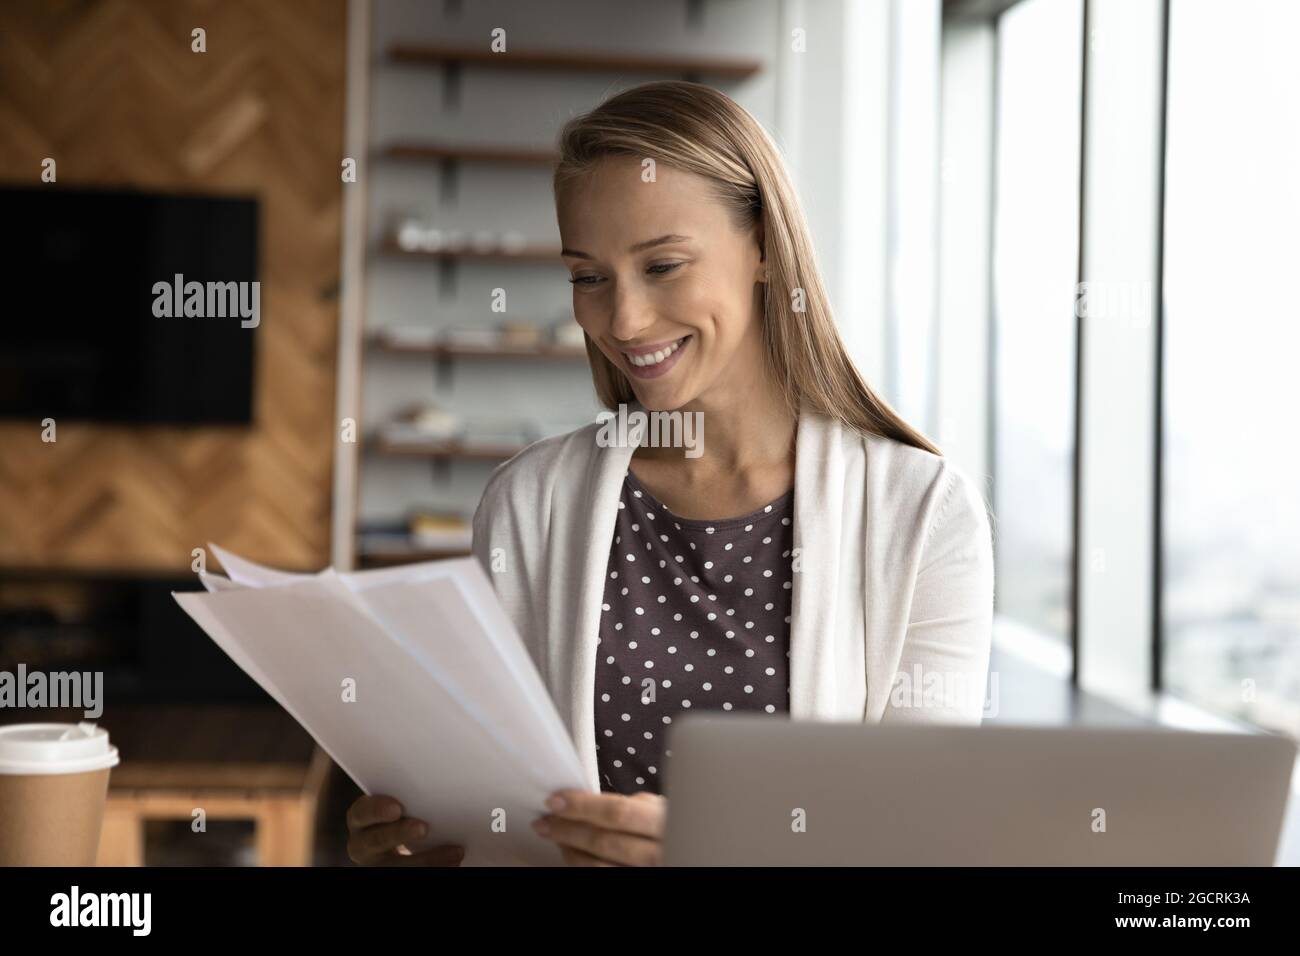 Happy business woman, office employee, assistant reviewing papers Stock Photo